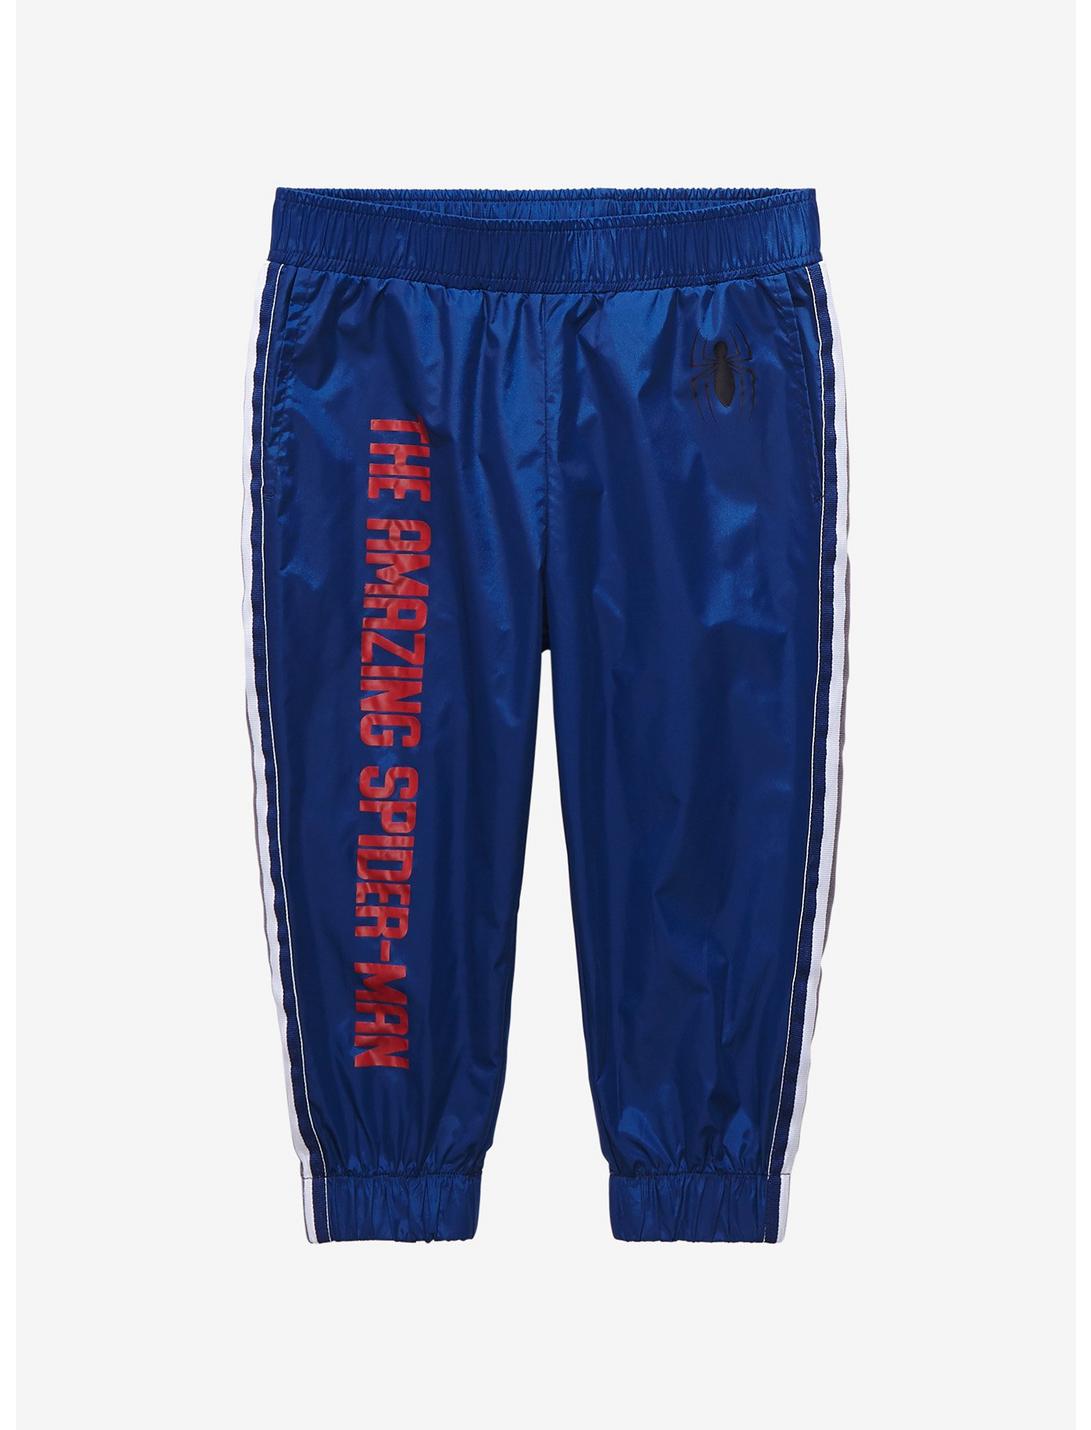 Our Universe Marvel Spider-Man Spider-Suit Toddler Joggers - BoxLunch Exclusive, BLUE, hi-res